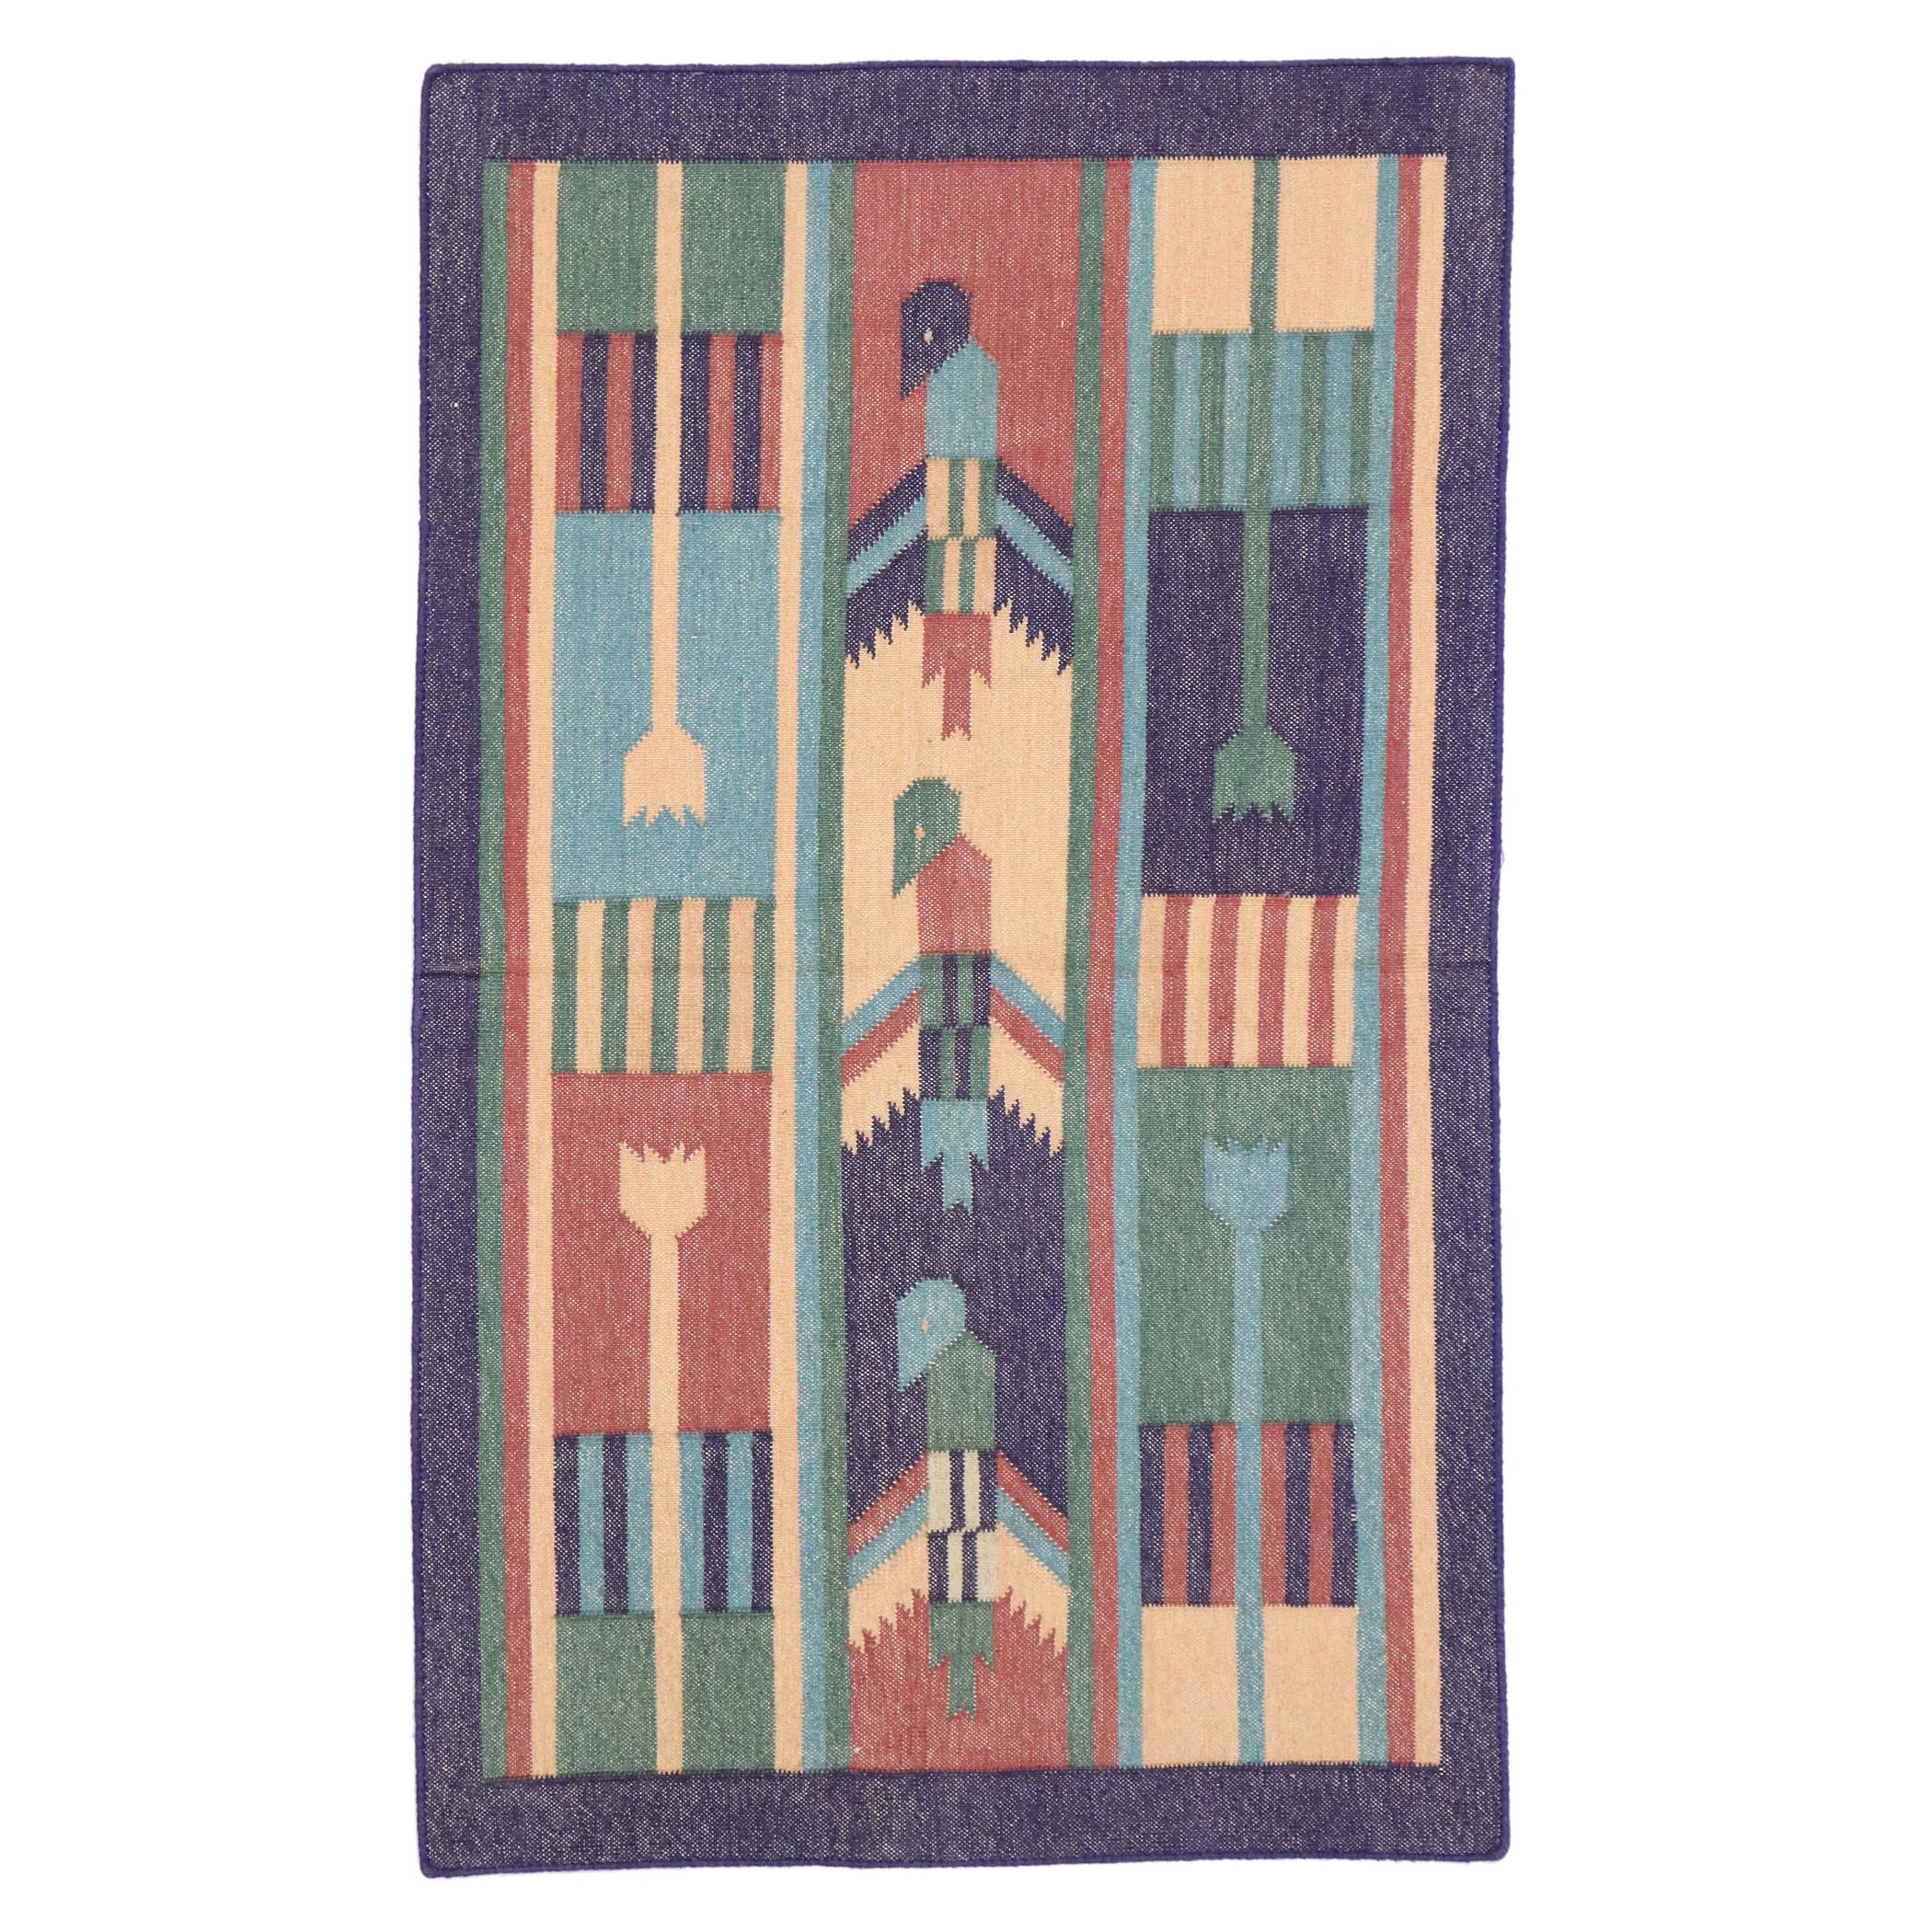 Vintage Indian Dhurrie Rug with Postmodern Cubist Style For Sale